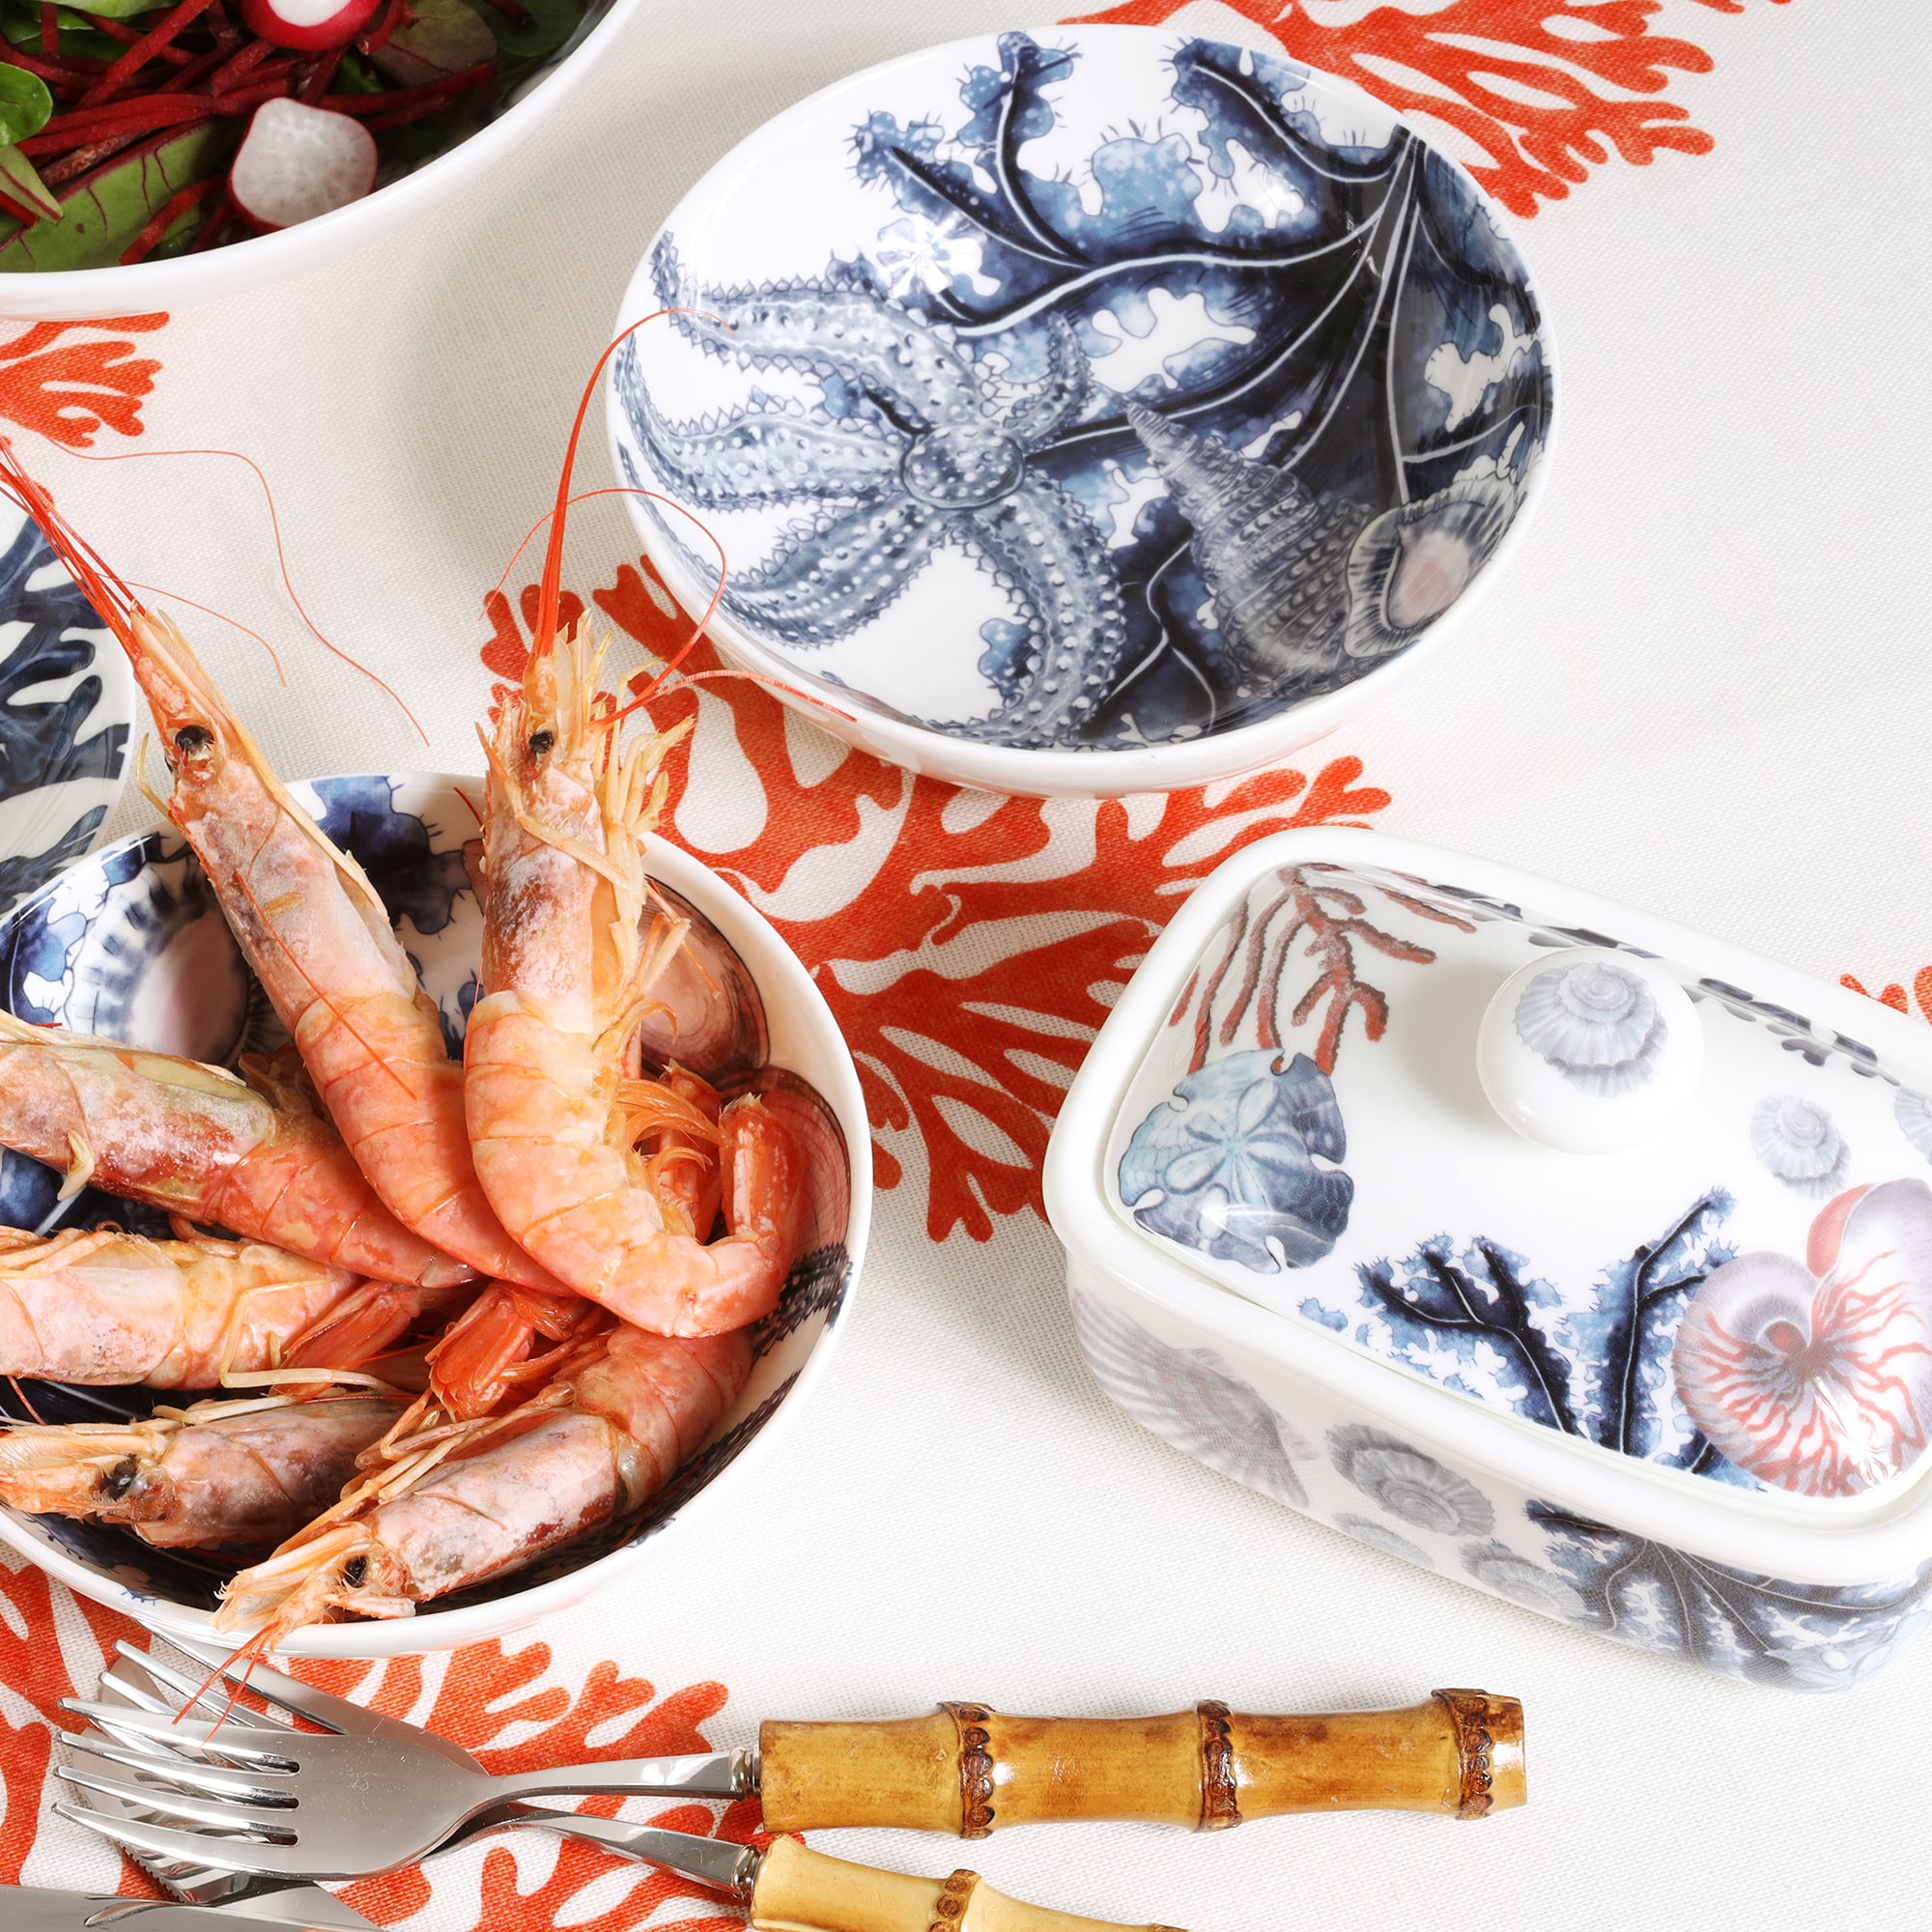 Bone China White bowl with hand drawn illustration of our Beachcomber range decorated with a starfish,seaweed and shells on our Fistral fabric.Also on the table are other beachcomber bowls and a matching butter dish and our bamboo cutlery